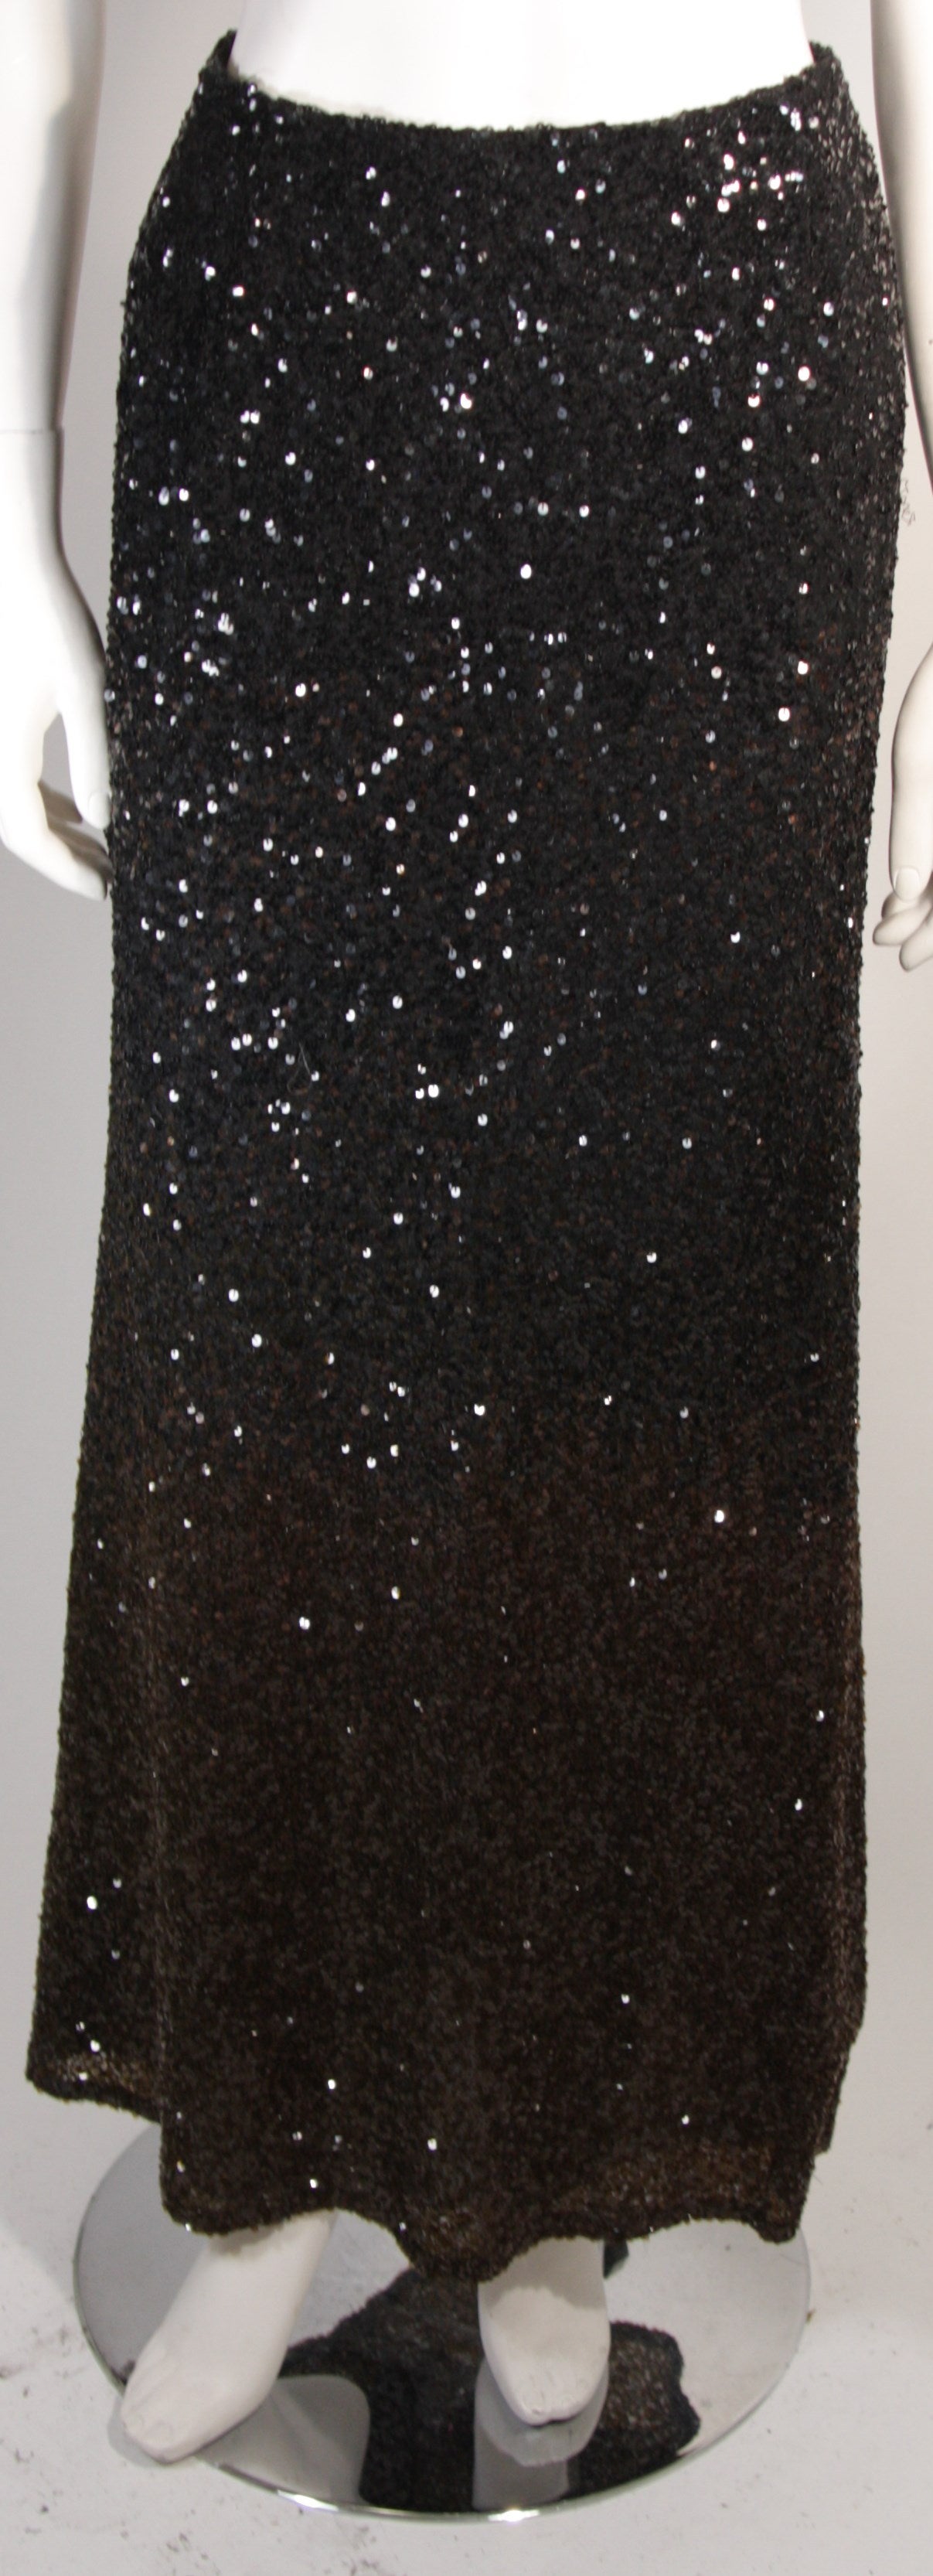 This is a beautiful Bill Blass floor length sequin skirt with a black to brown ombre. Features a center back zipper. Made in USA.

Measures (Approximately)
Size 6
Length: 41.5